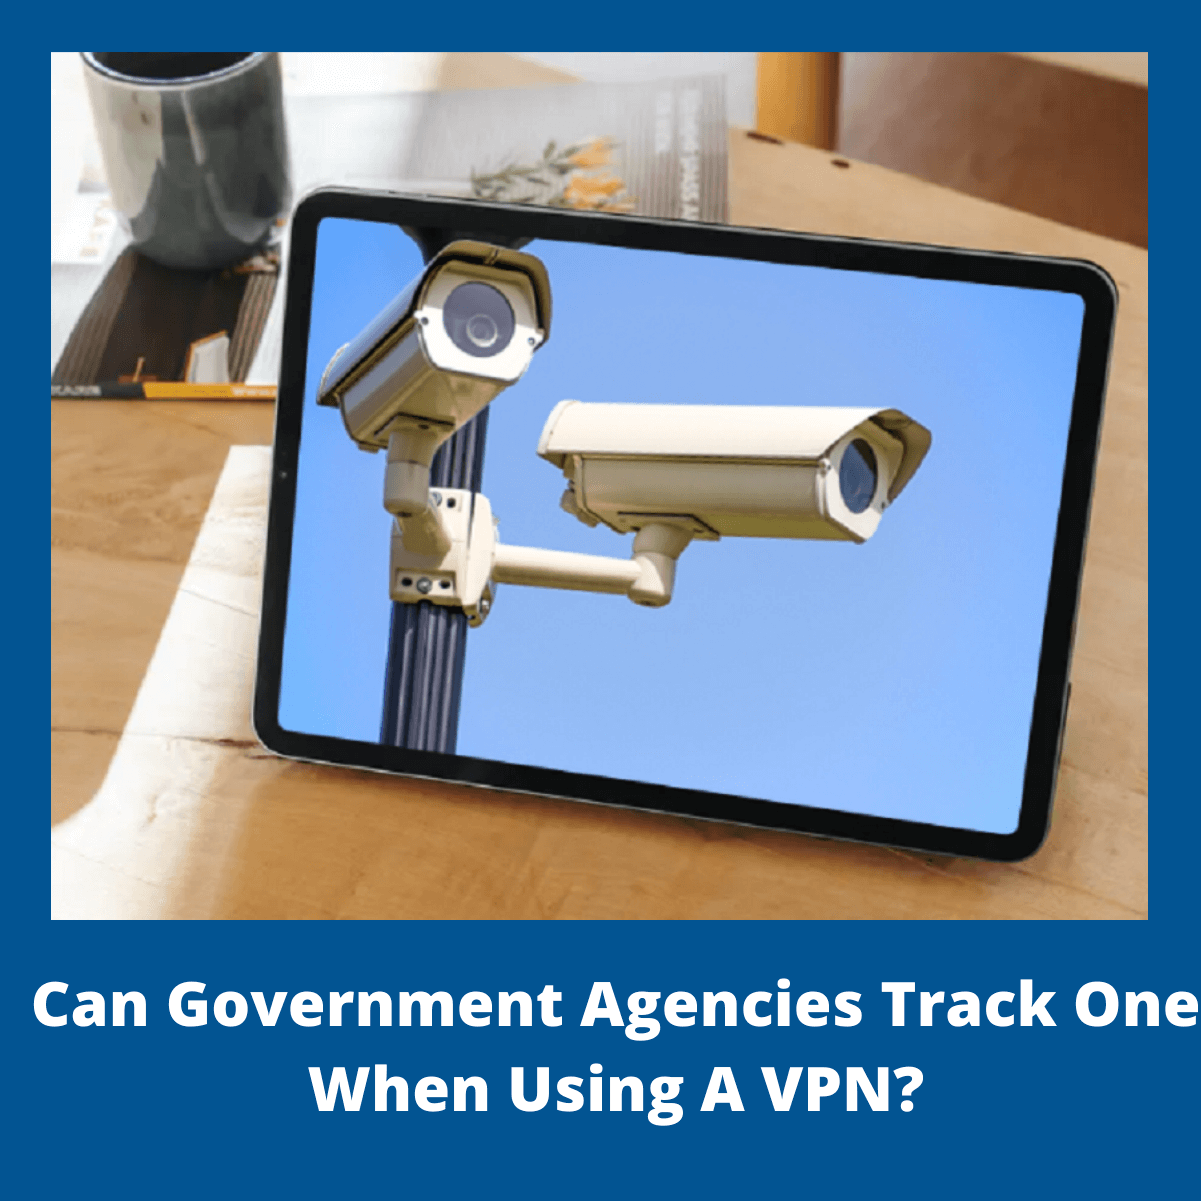 can-government-track-users'-activities-even-when-using-a-vpn